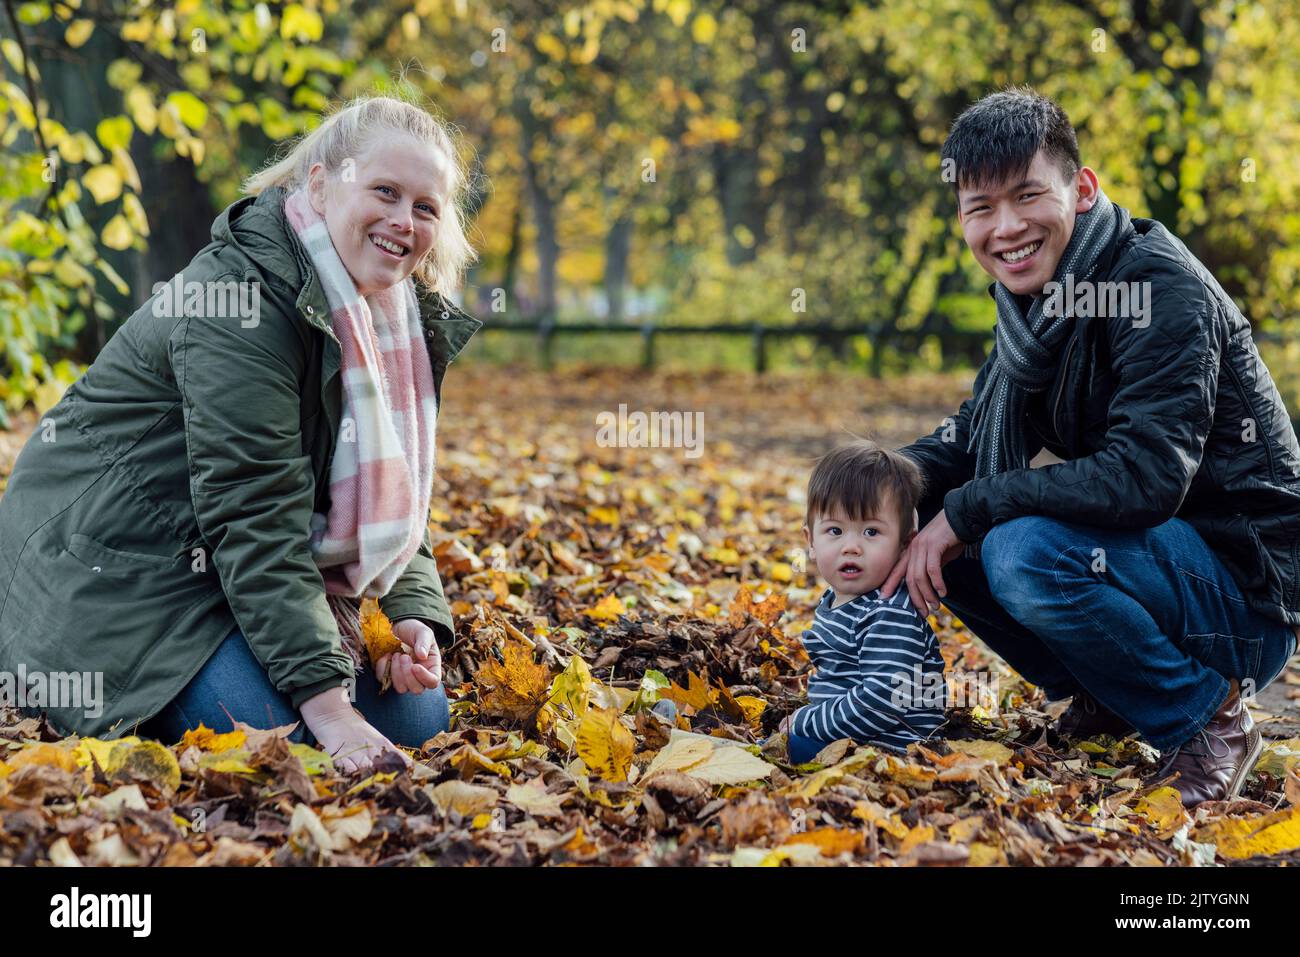 A family crouching down and playing with fallen leaves in nature in Northumberland, North East England. They are all looking at the camera and smiling Stock Photo